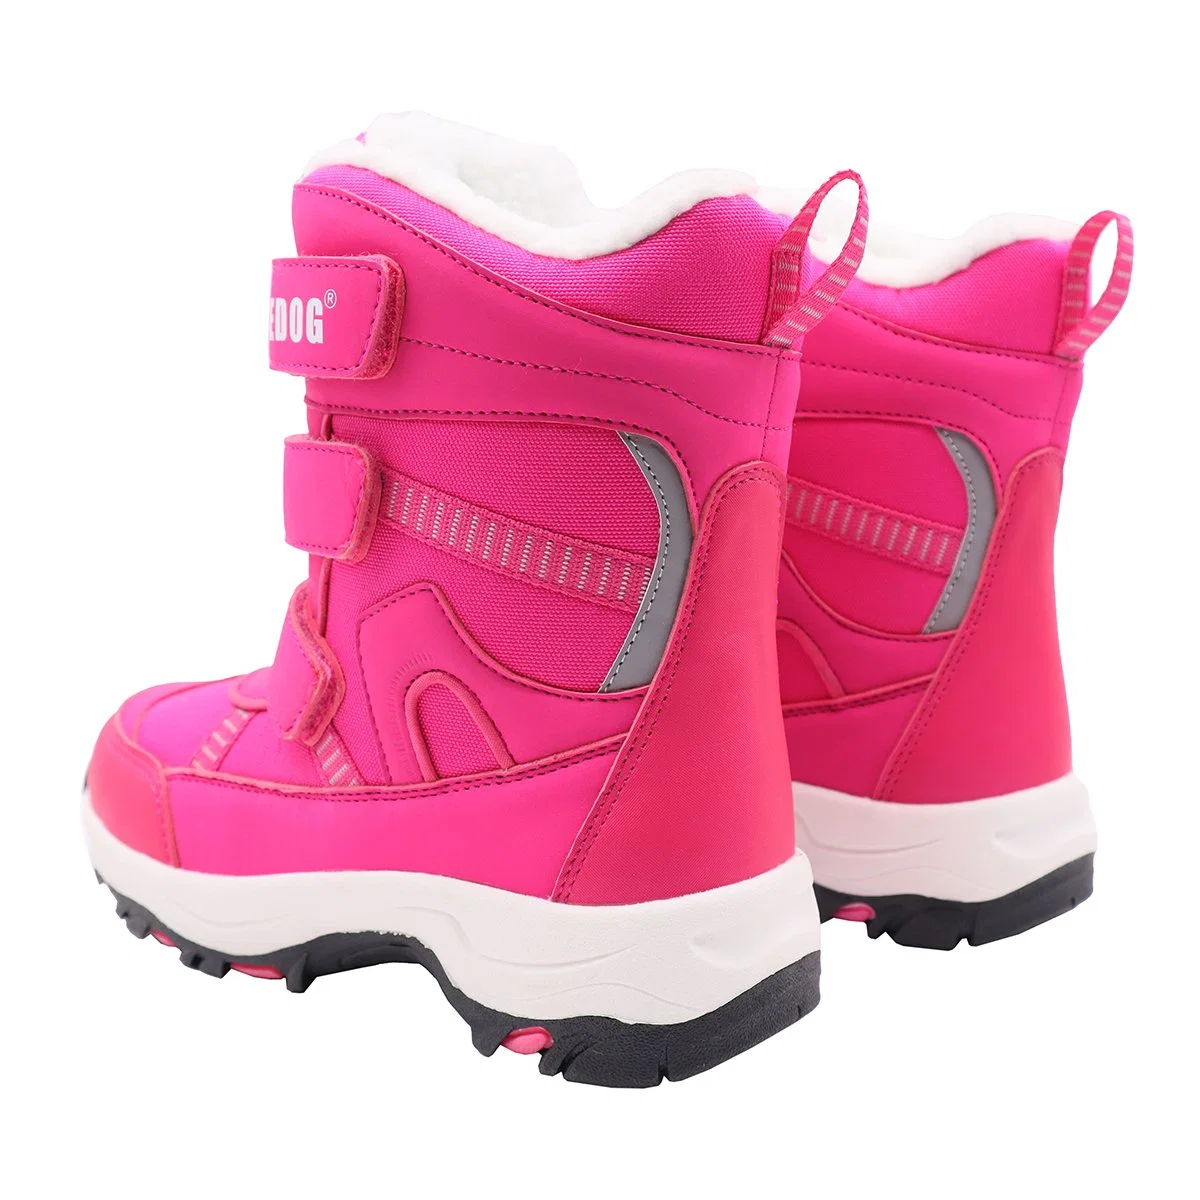 Snow Boots Winter Waterproof Antiskid Boots Hiking Outdoor Shoes for Children